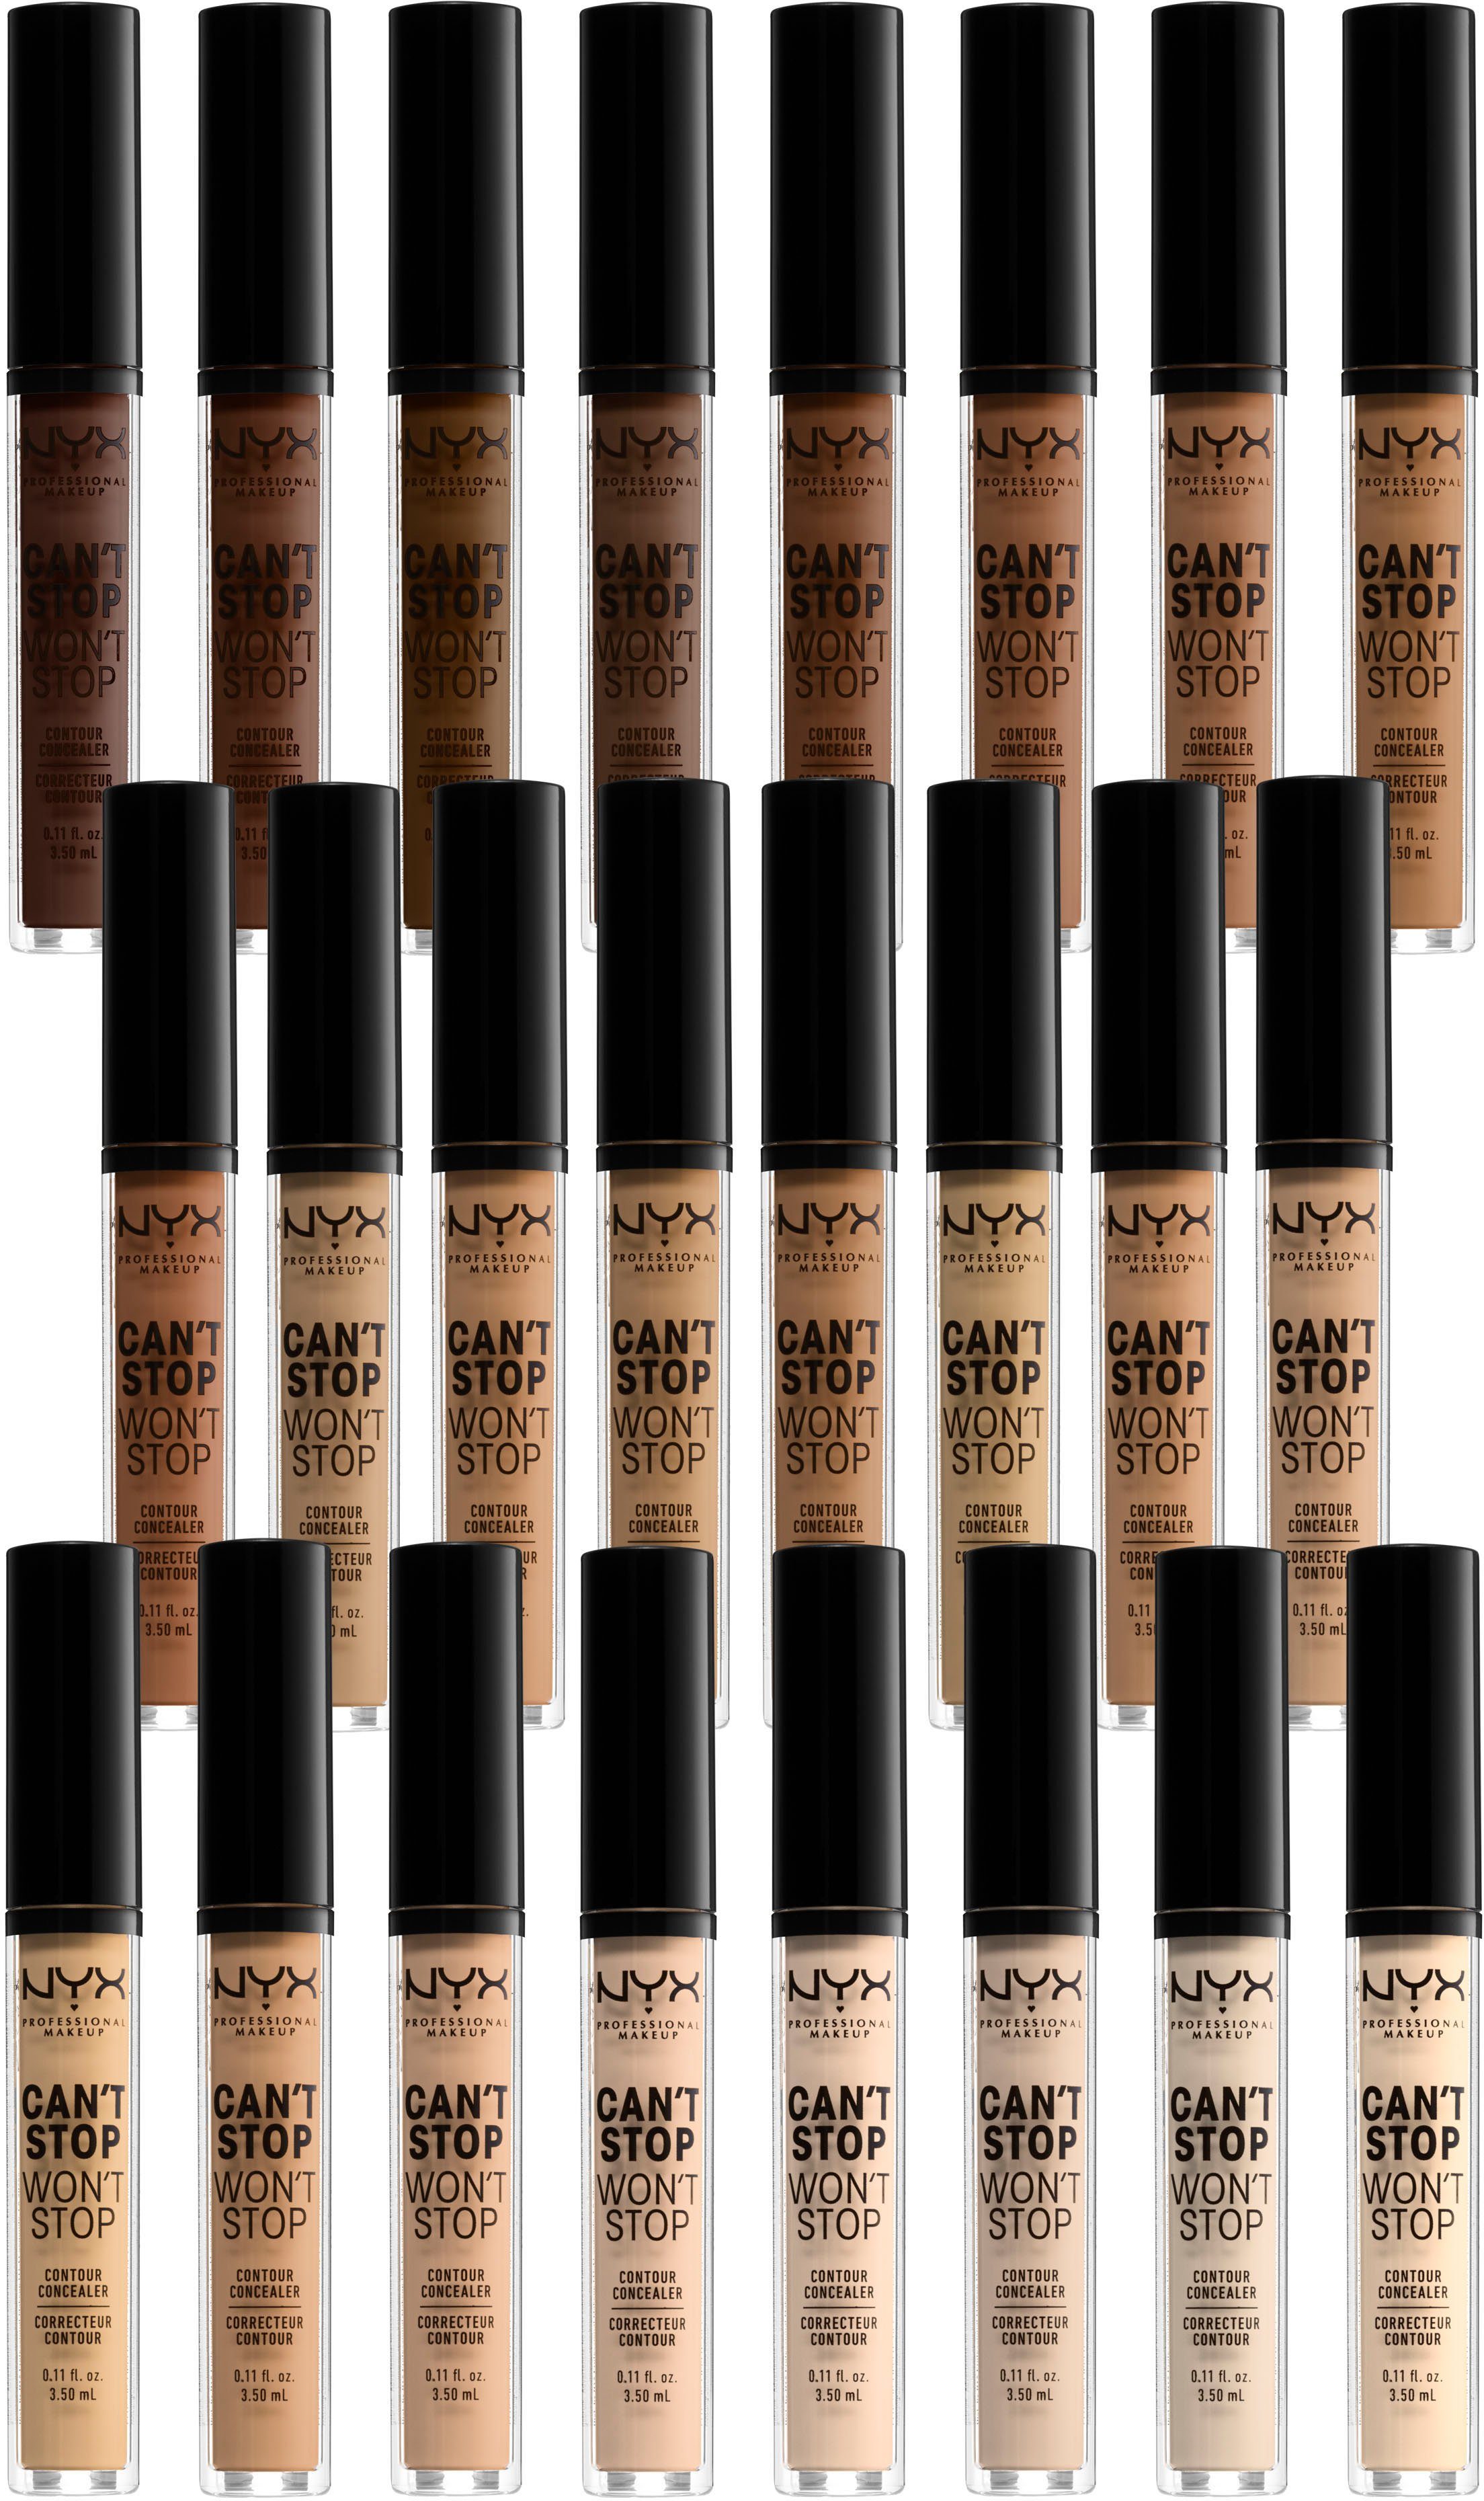 CSWSC02 Stop NYX Professional Concealer NYX Won´t Stop Concealer Makeup Alabaster Can´t